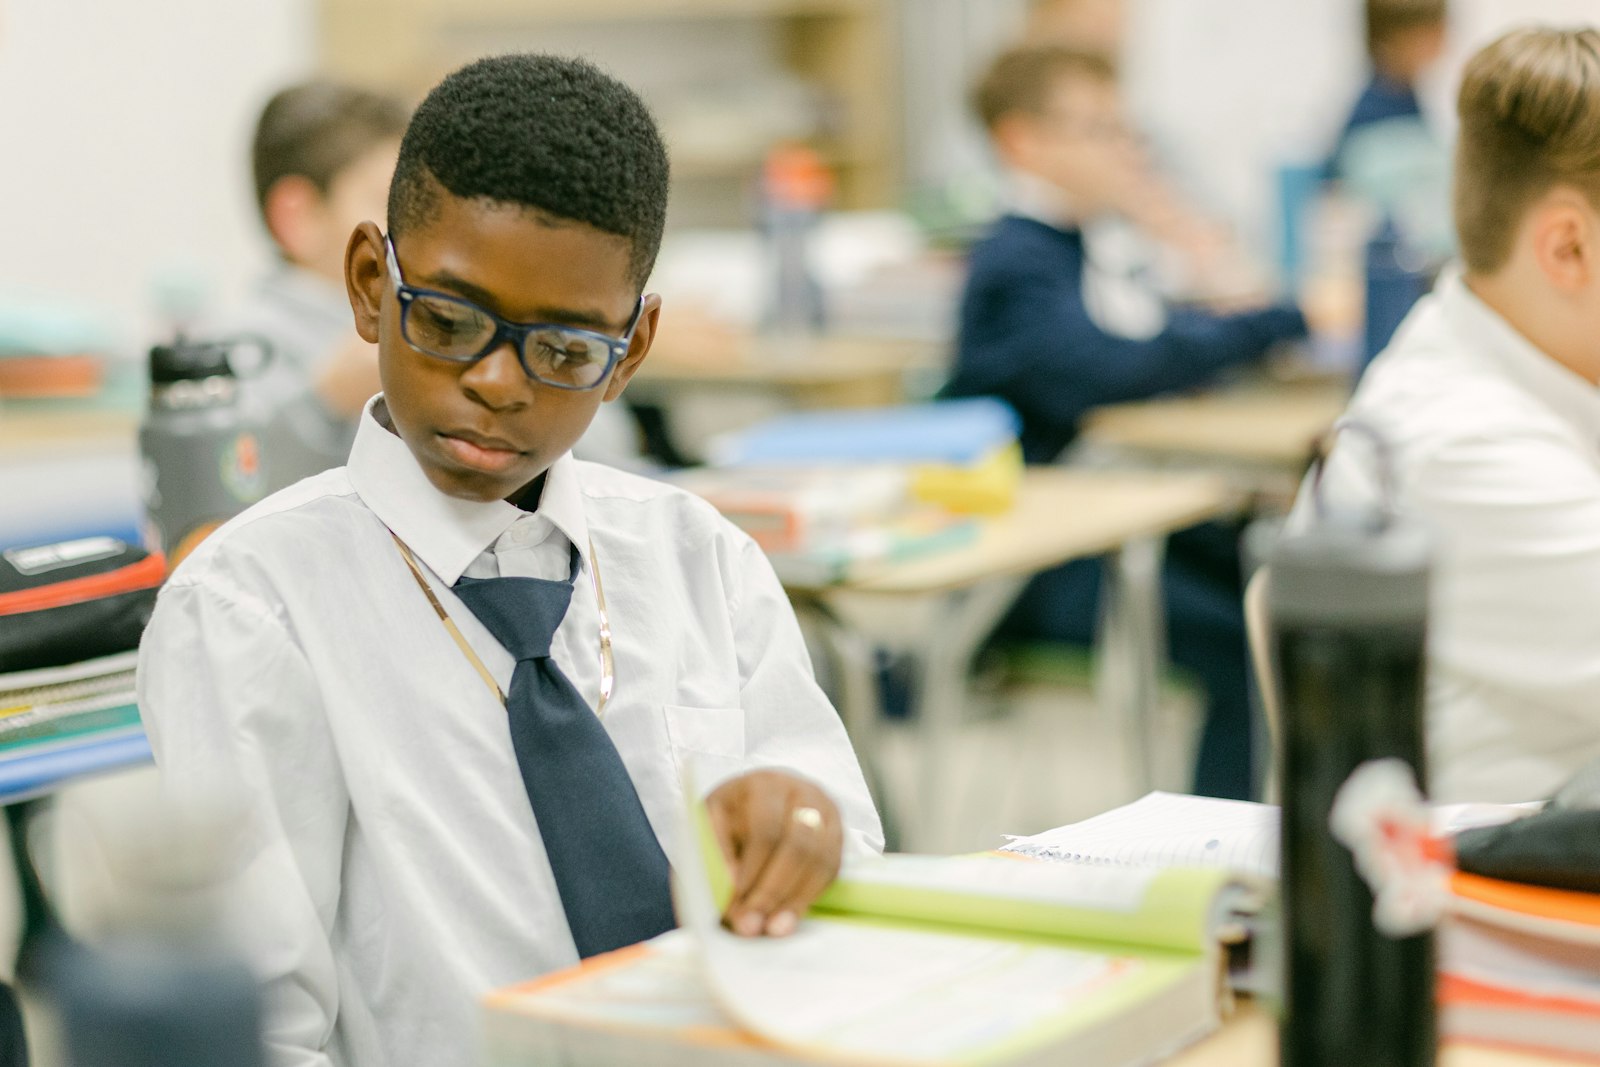 A student completes his assignment during a class at St. Anne Catholic School in Warren. Across the Archdiocese of Detroit, Catholic schools have seen steady or increasing enrollment, with leaders able to retain an influx of new families who discovered Catholic education during the pandemic and have become integrated into the school community.